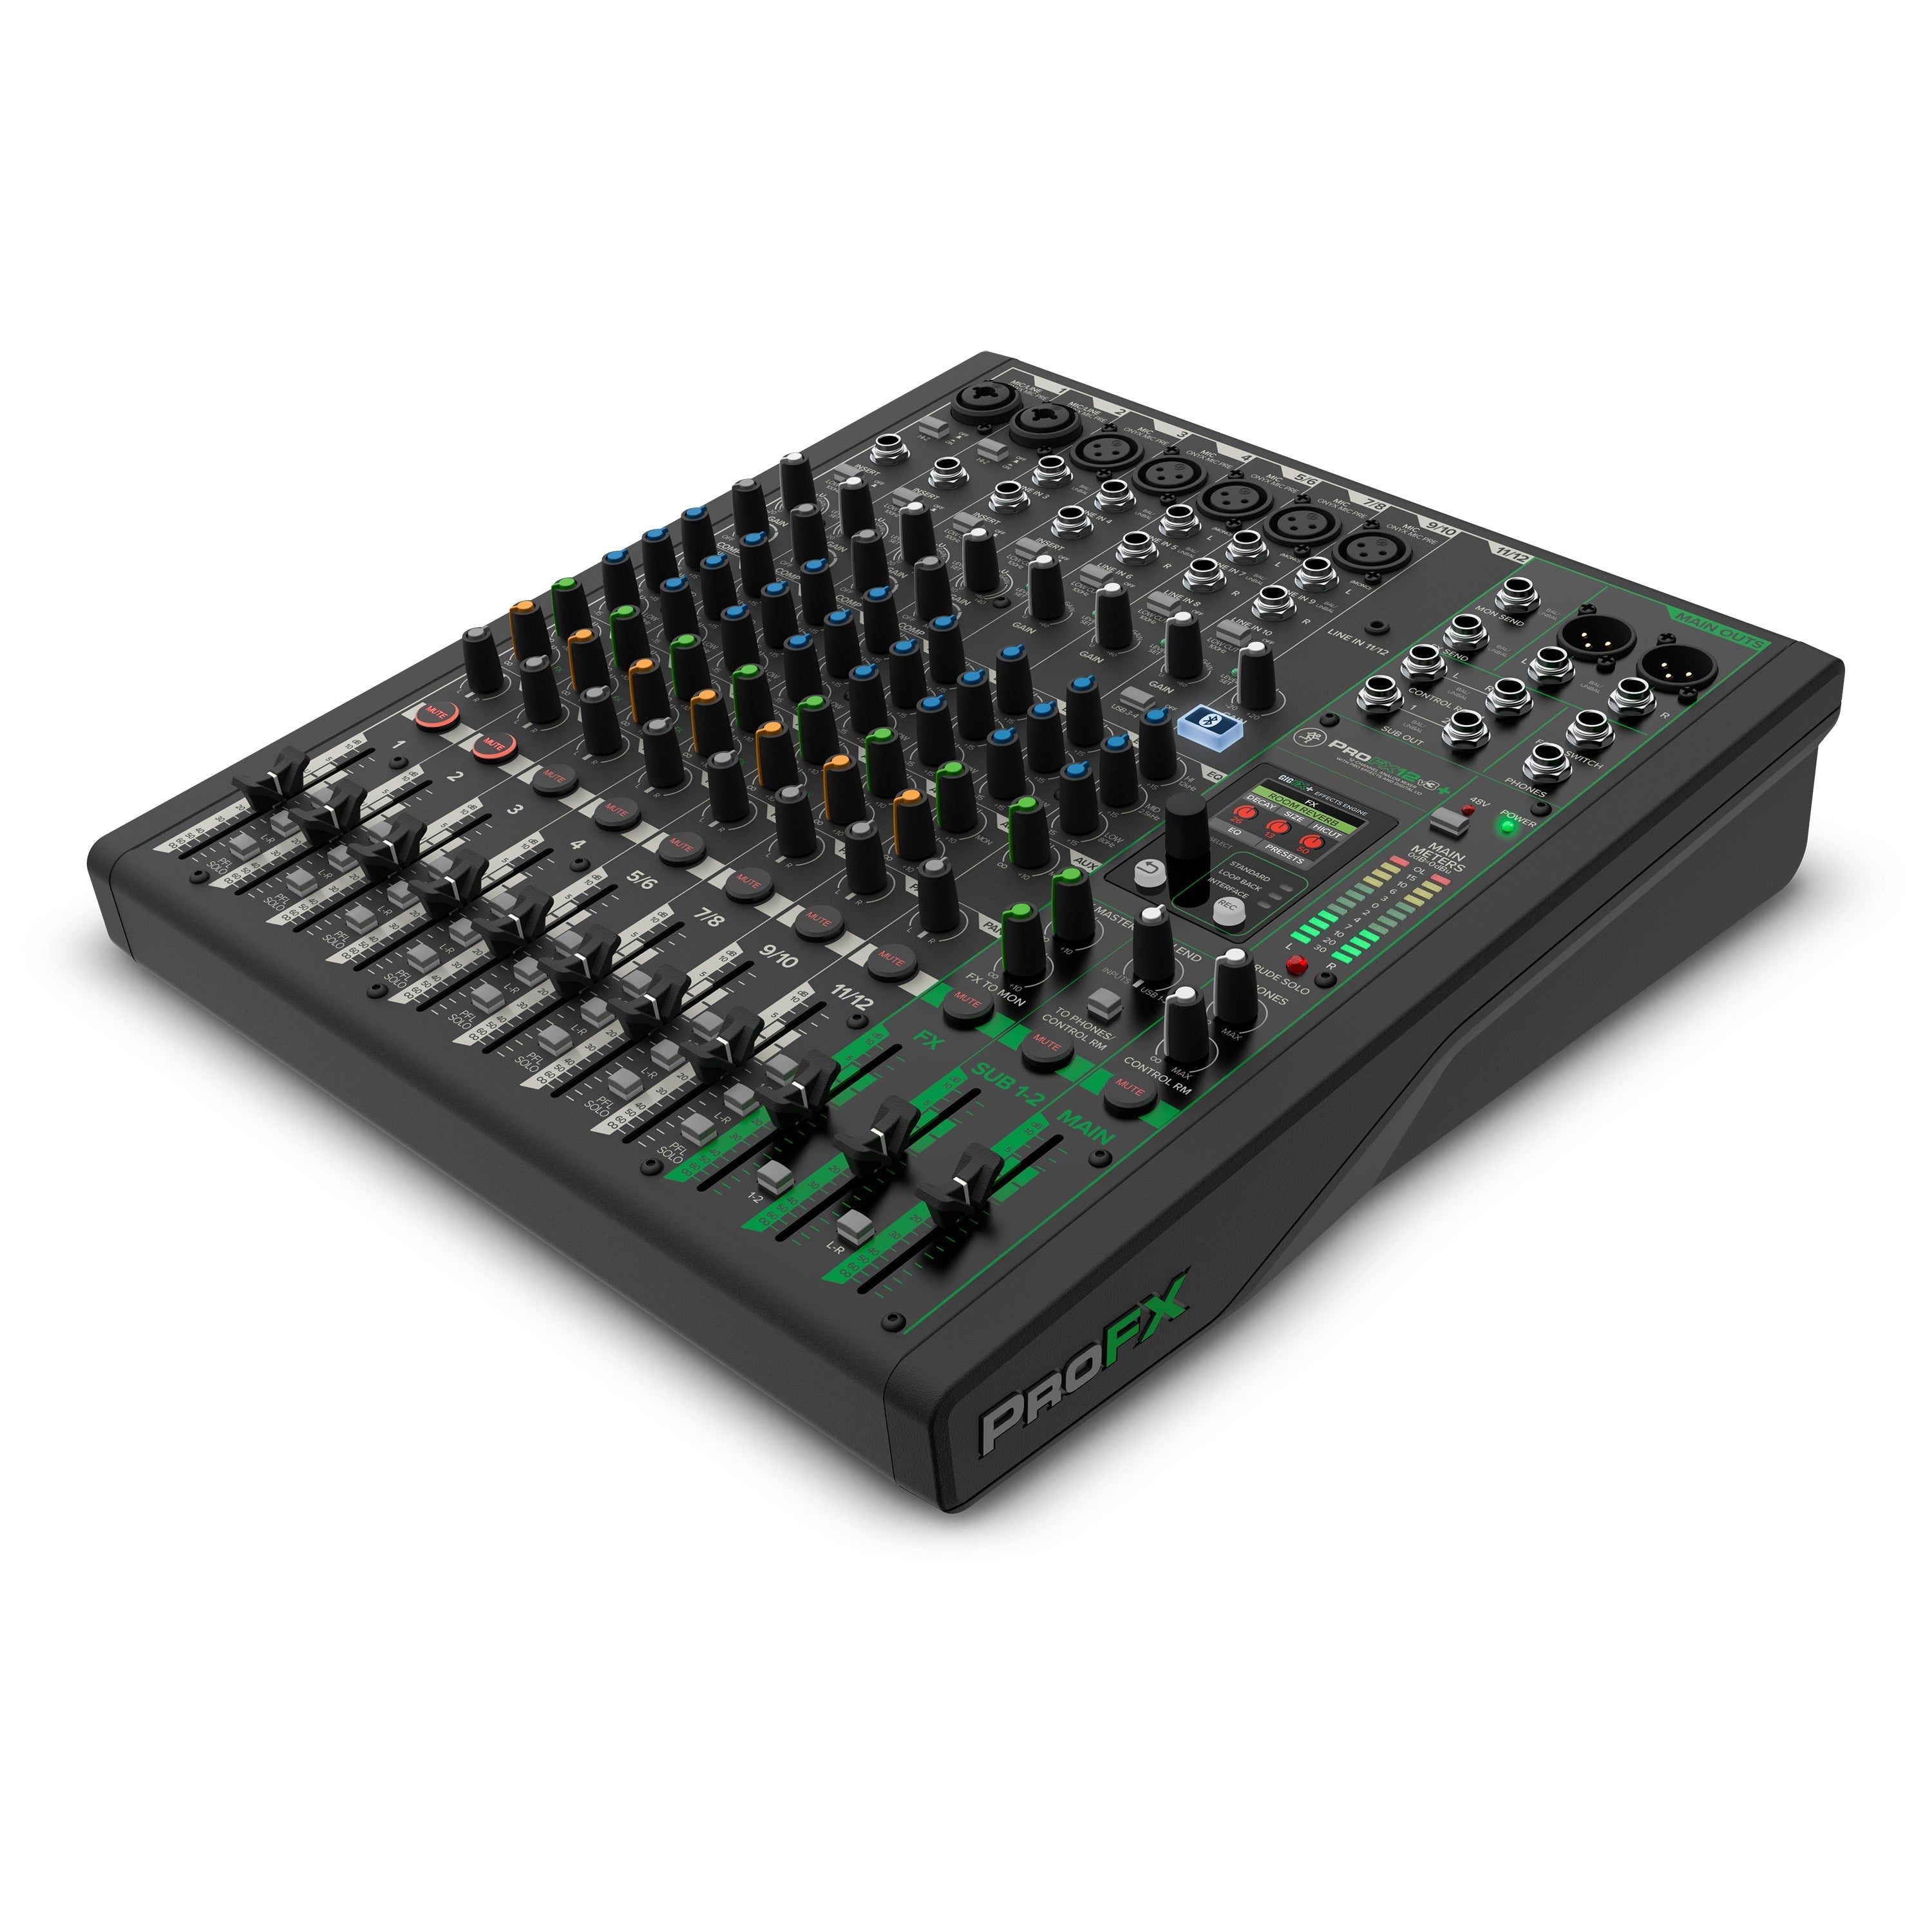 Mackie ProFX12v3+ 12 Channel Mixer CABLE KIT